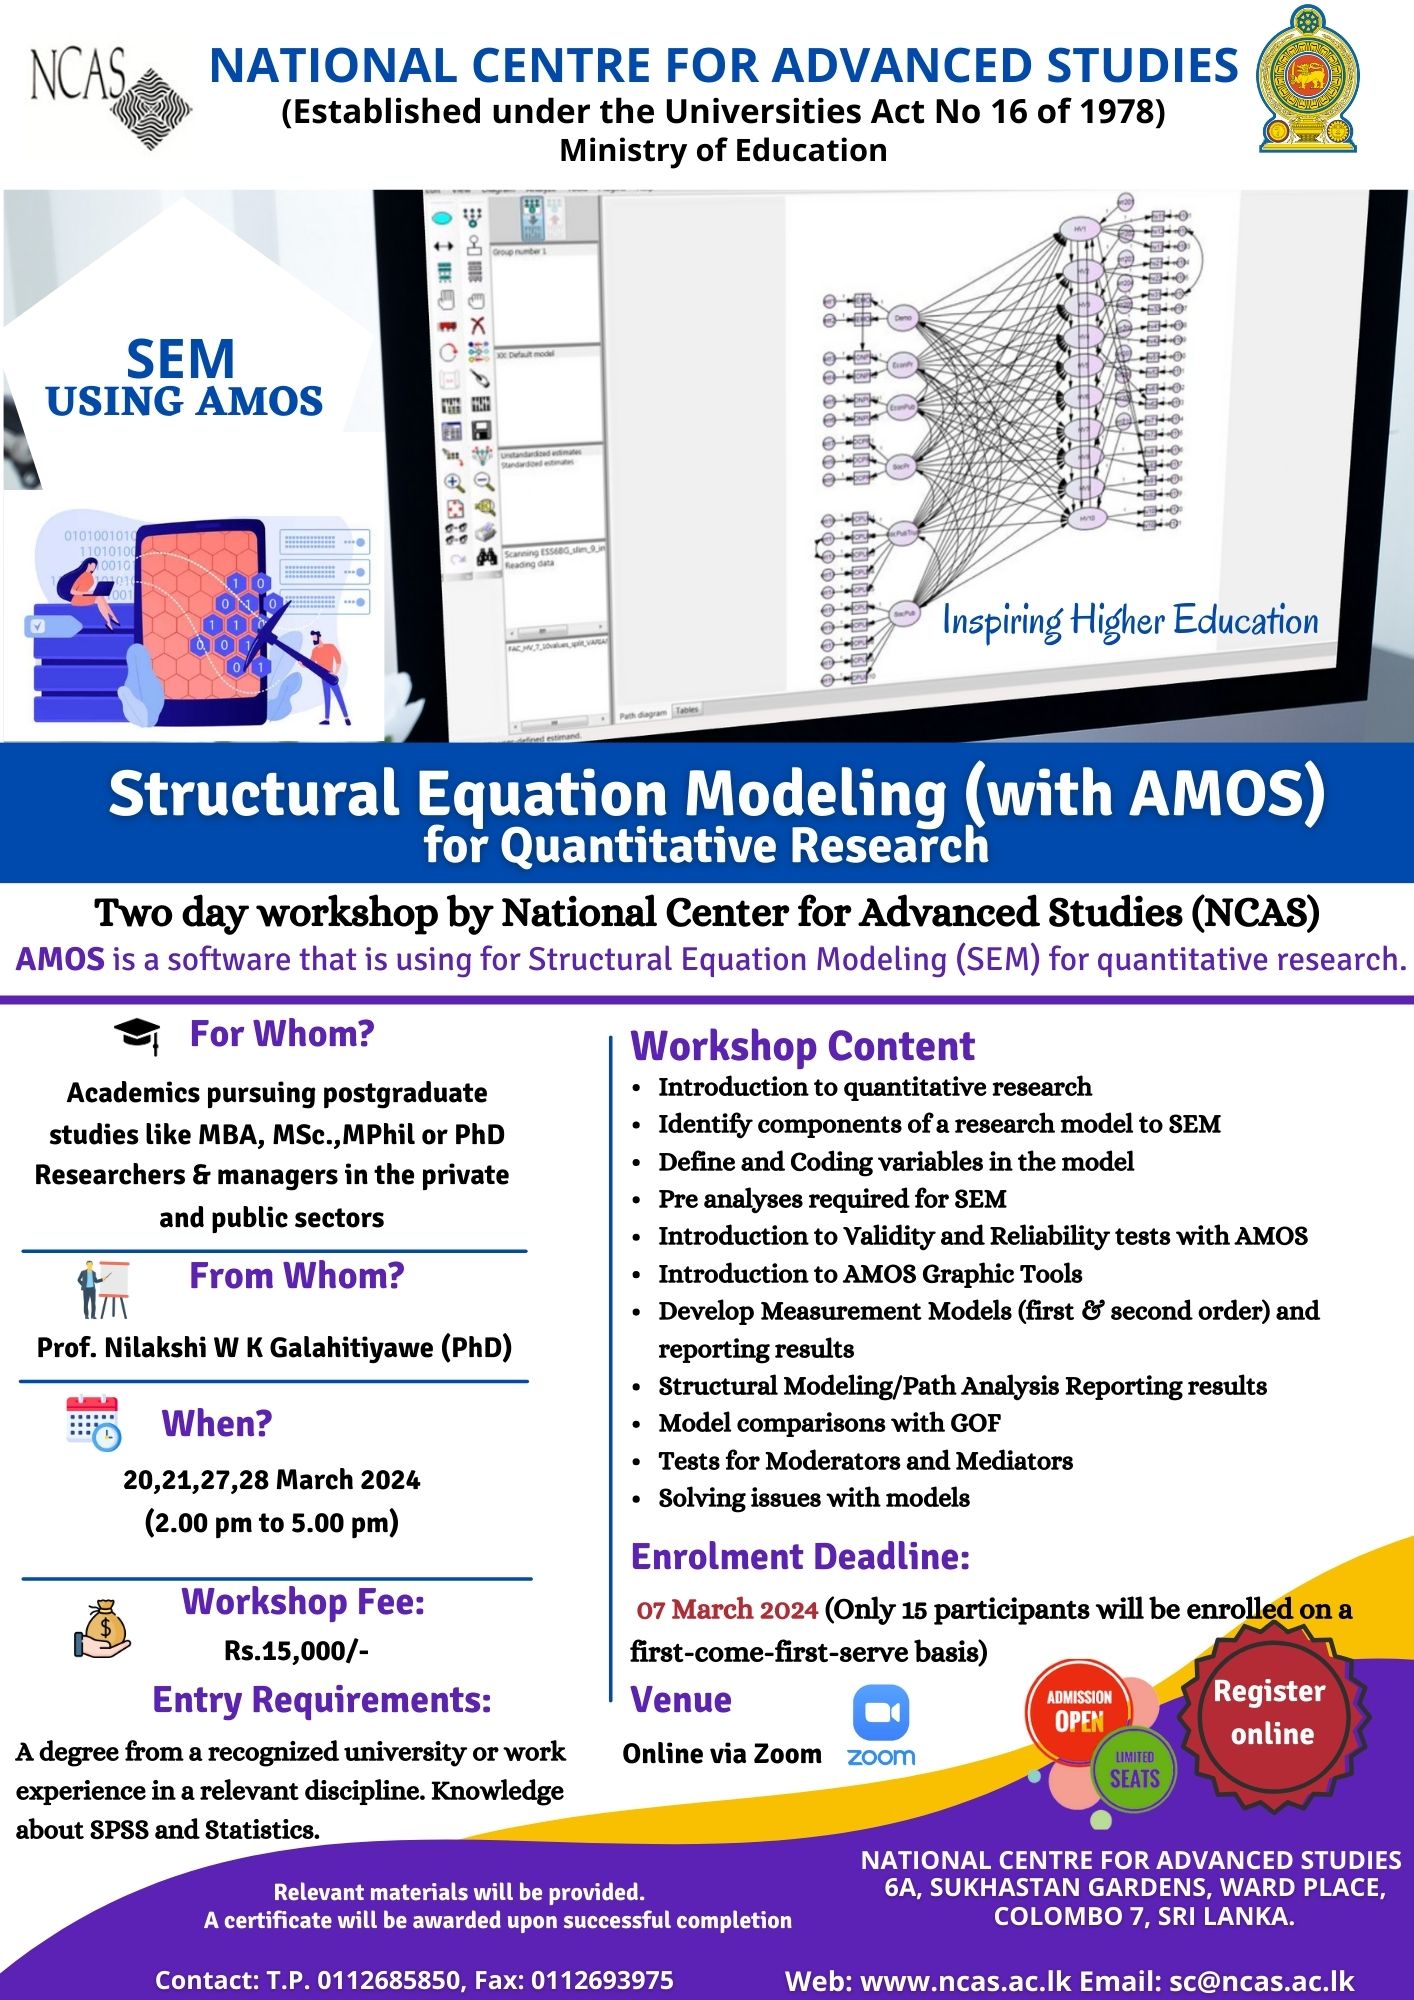 Workshop on Structural Equation Modeling (with AMOS) for Quantitative Research